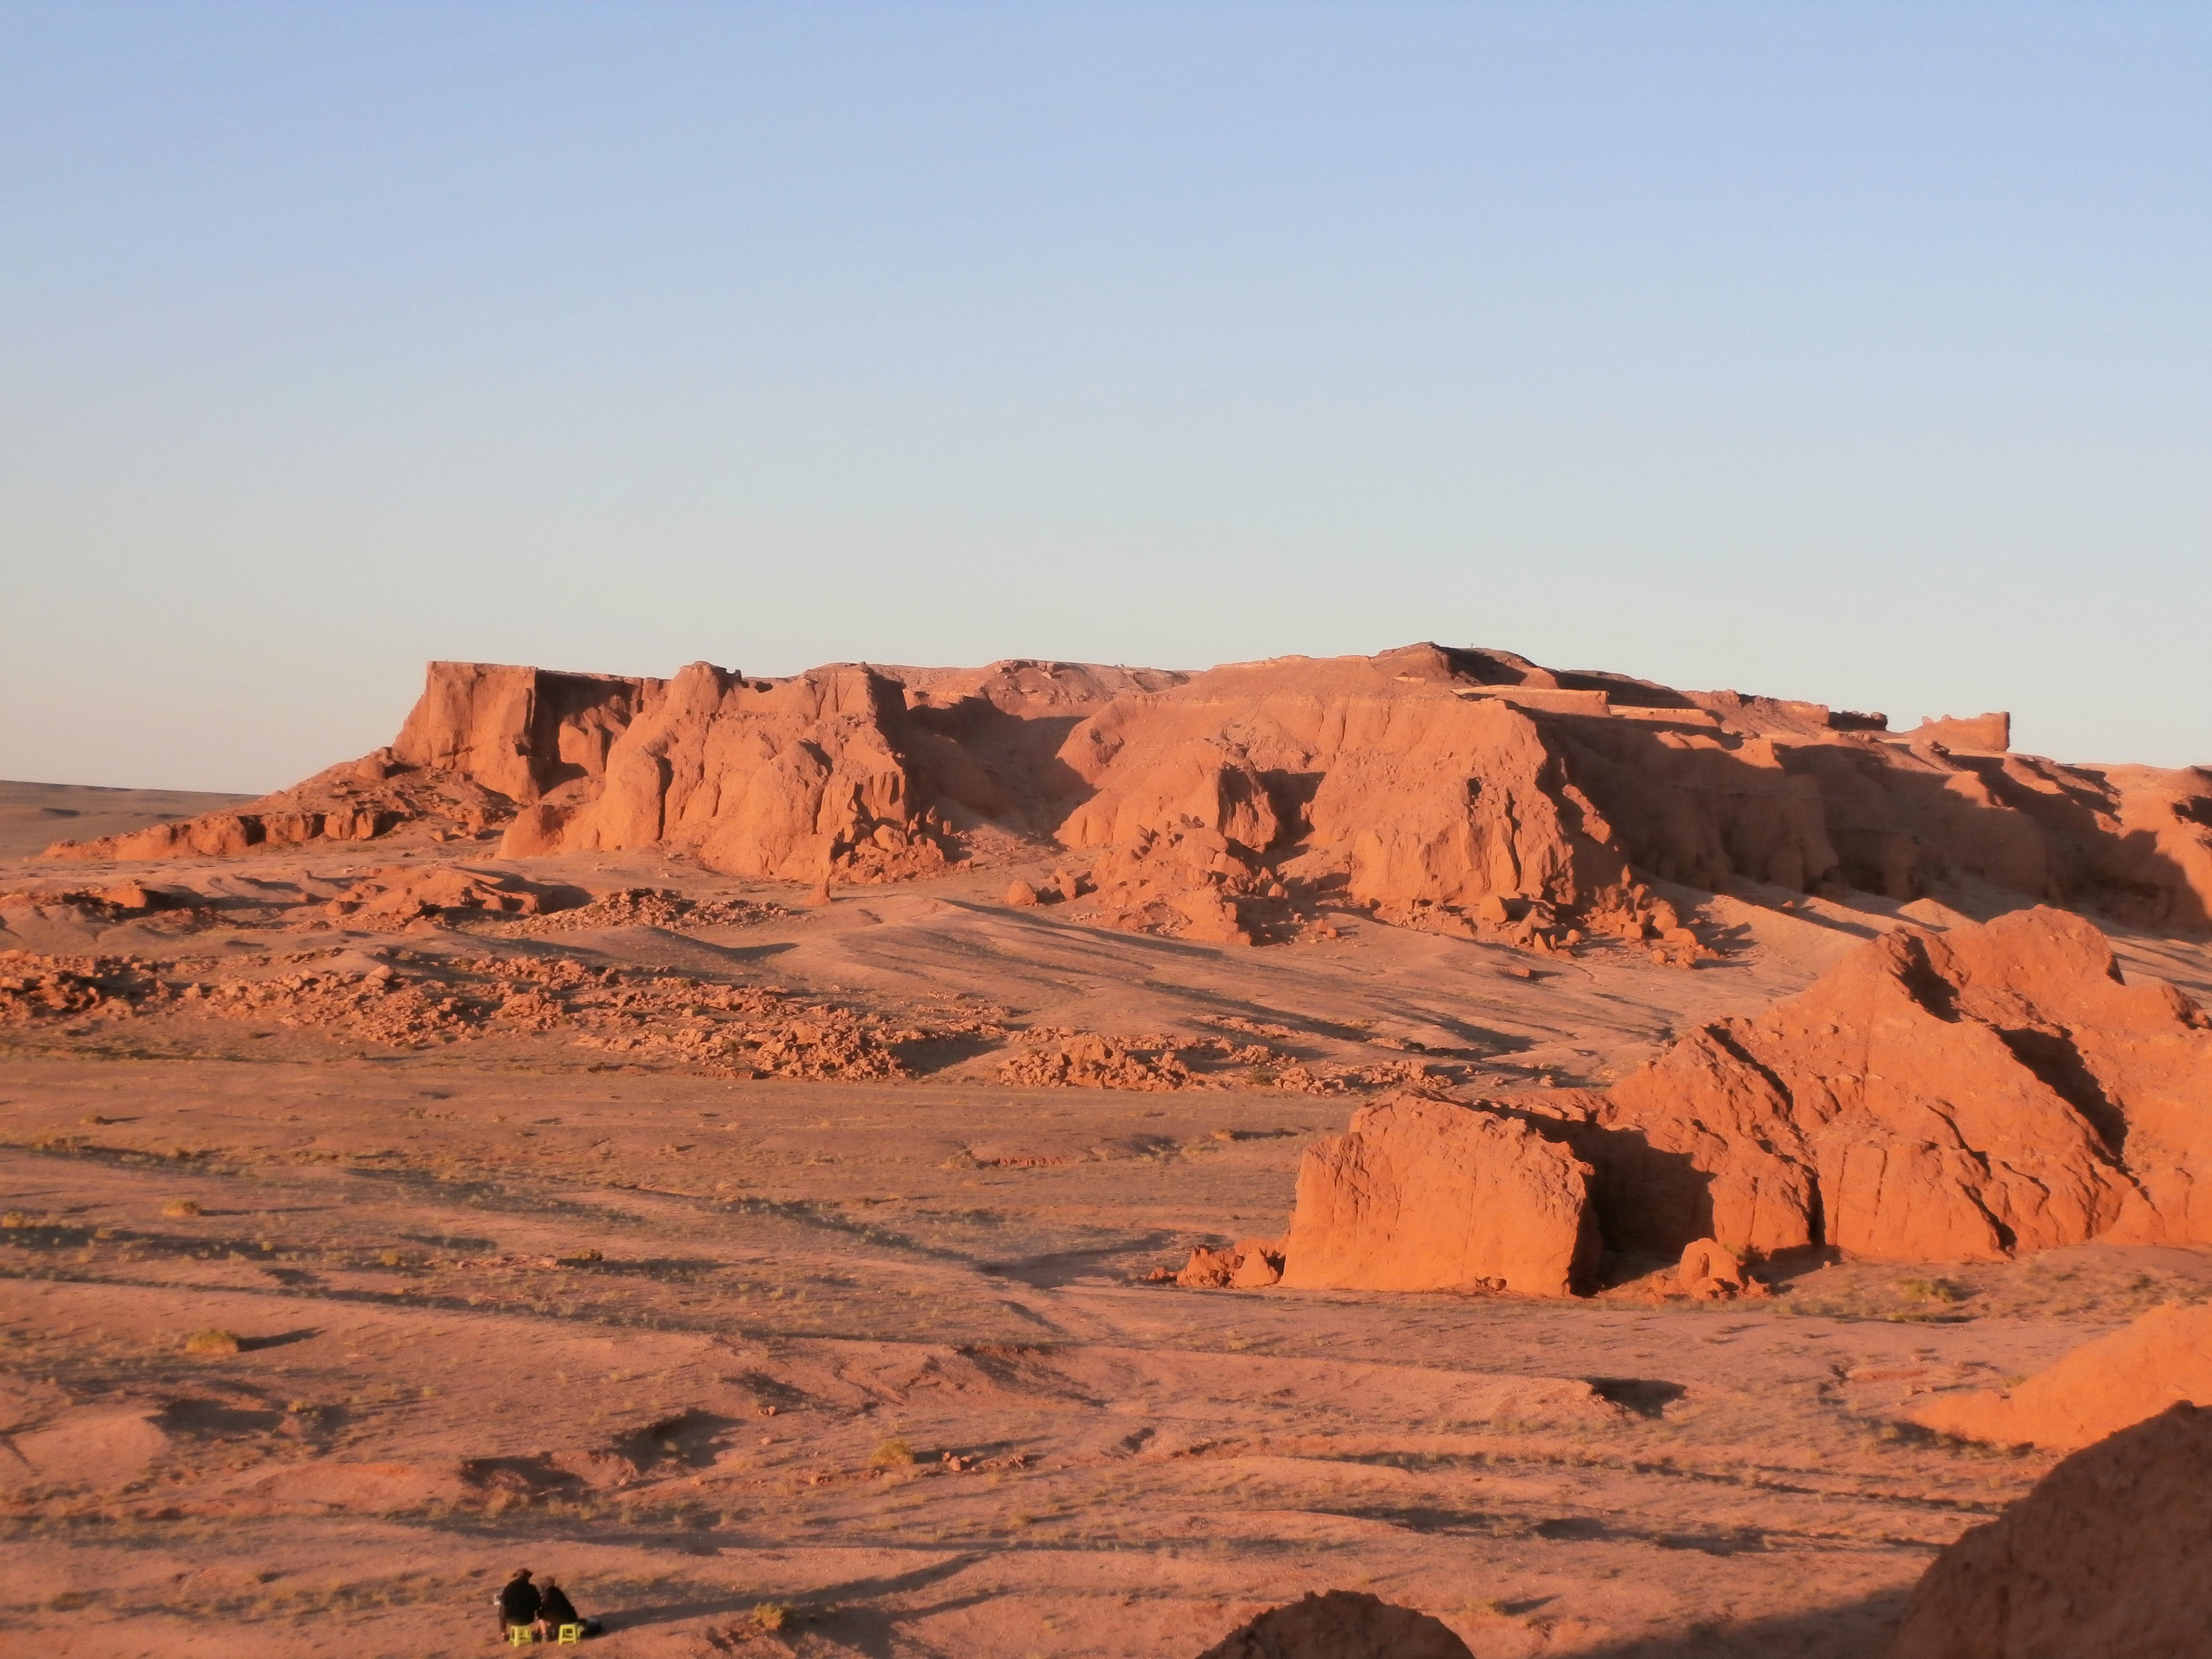 Mongolia's Flaming Cliffs - also known as Bayanzag - in the southern Gobi Desert